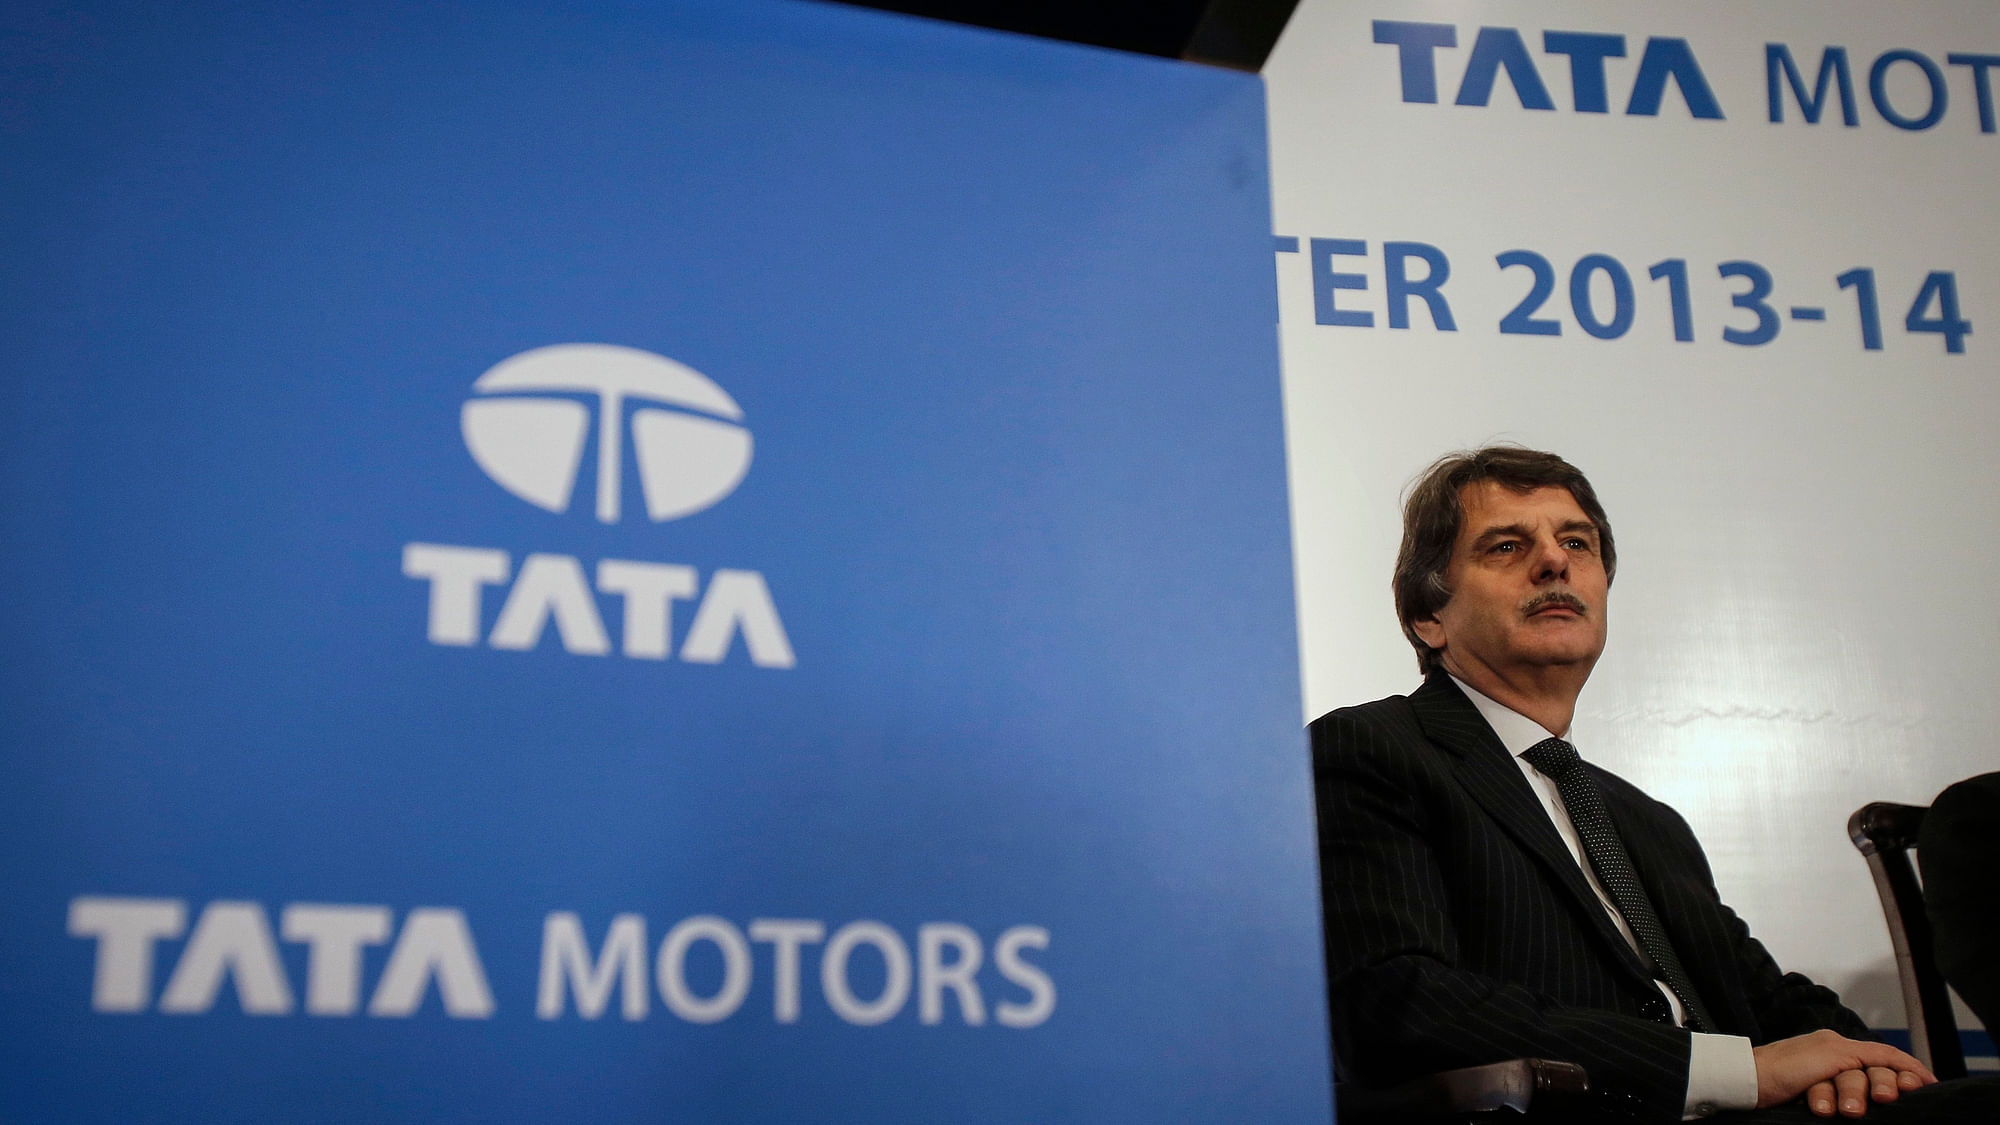 Jaguar Land Rover (JLR) Chief Executive Officer Ralf Speth looks on during a news conference to announce Tata Motors’ third quarter results in Mumbai February 10, 2014. (Photo: Reuters)